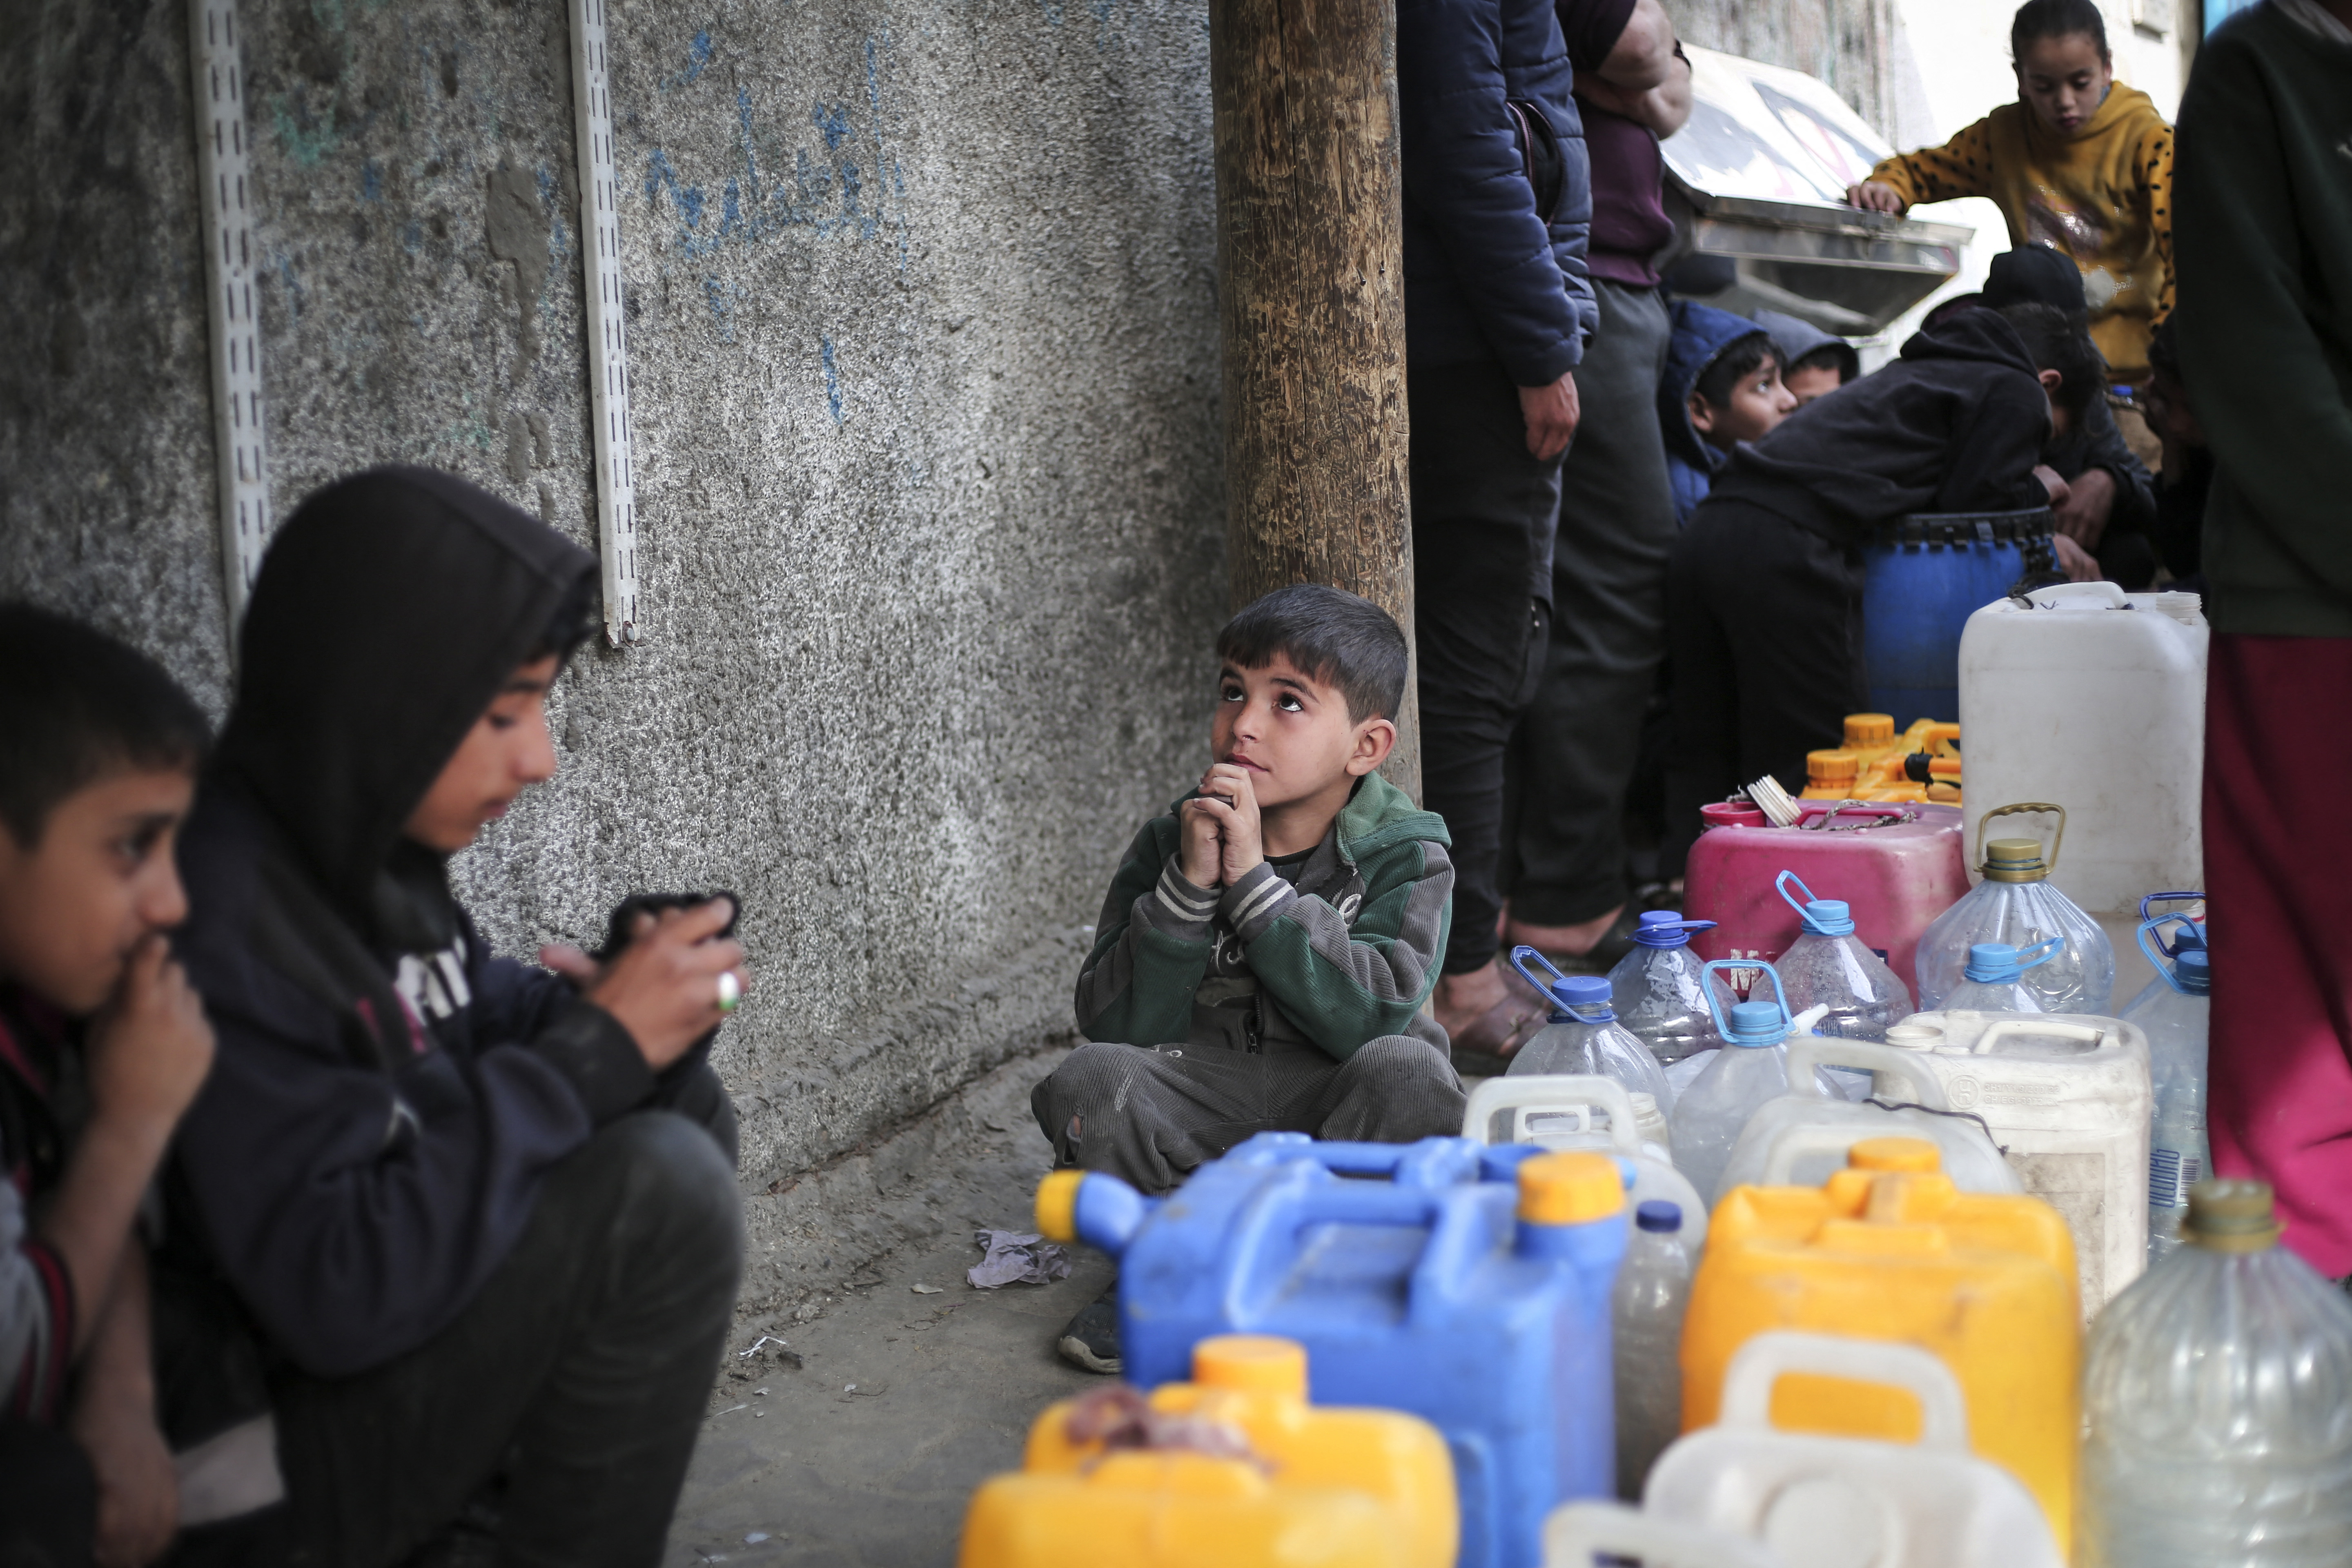 Children gather around containers of water in Rafah, Gaza, on March 1.